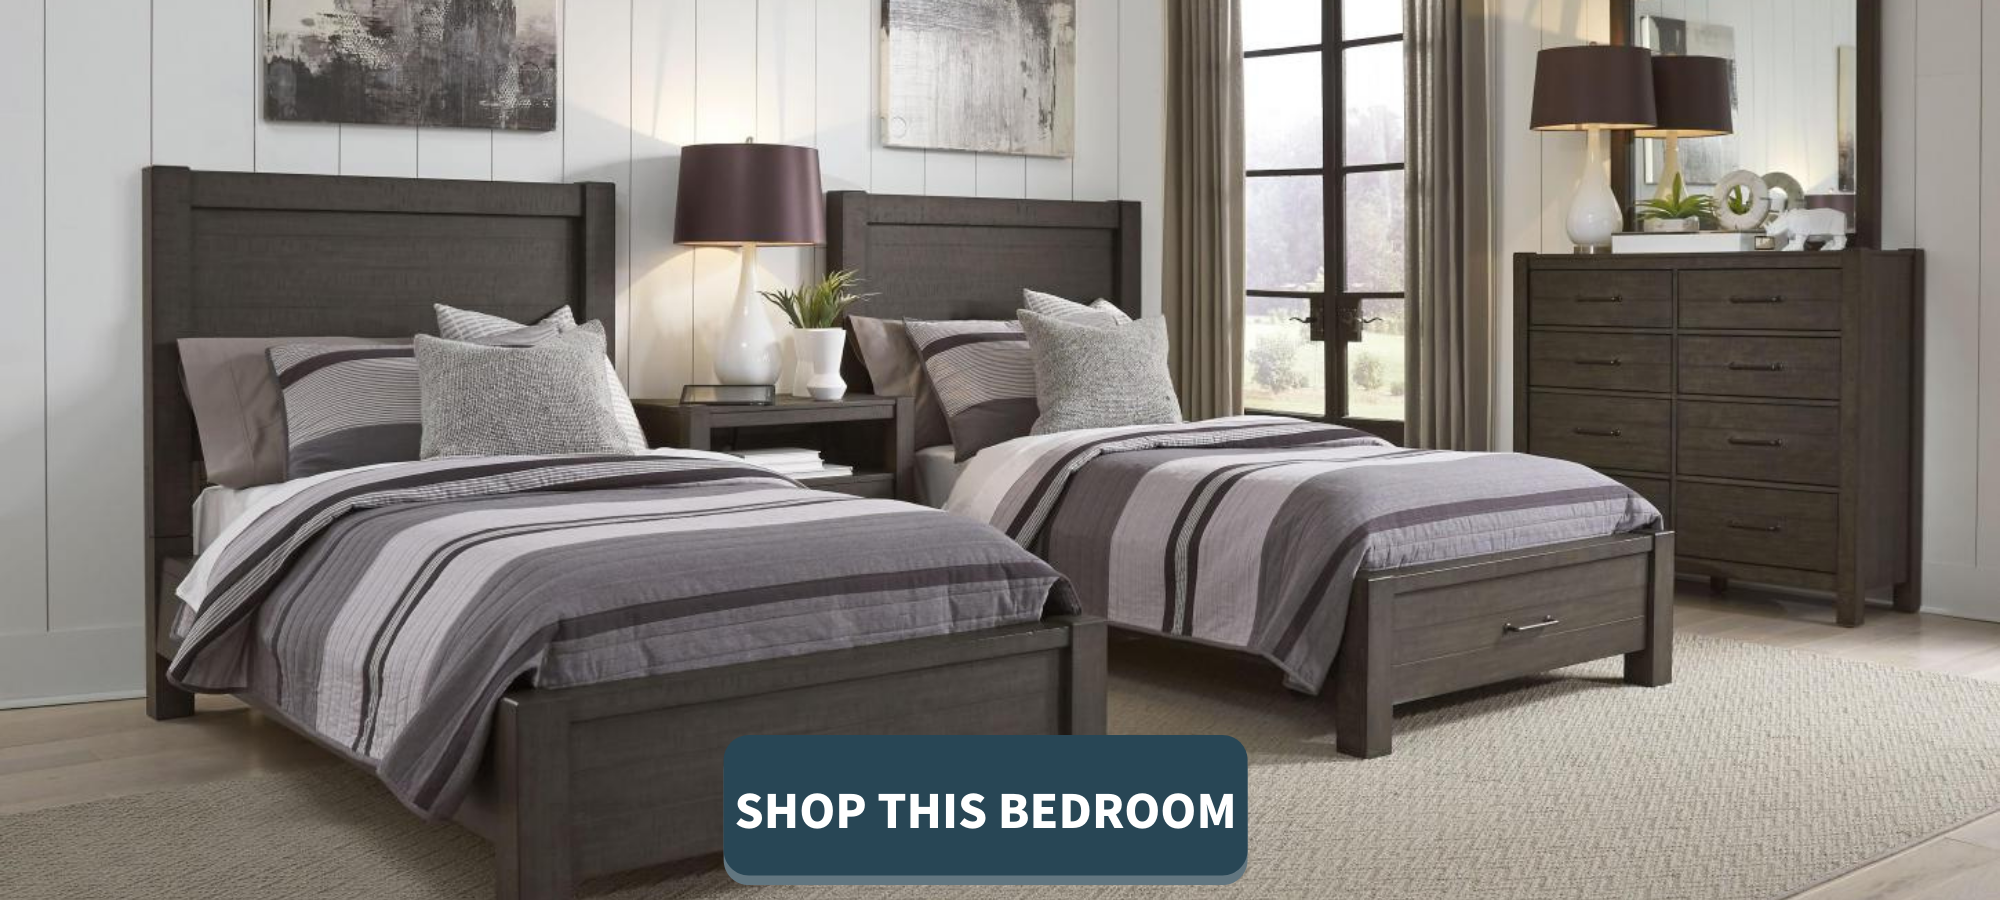 Millcreek Bedroom Collection